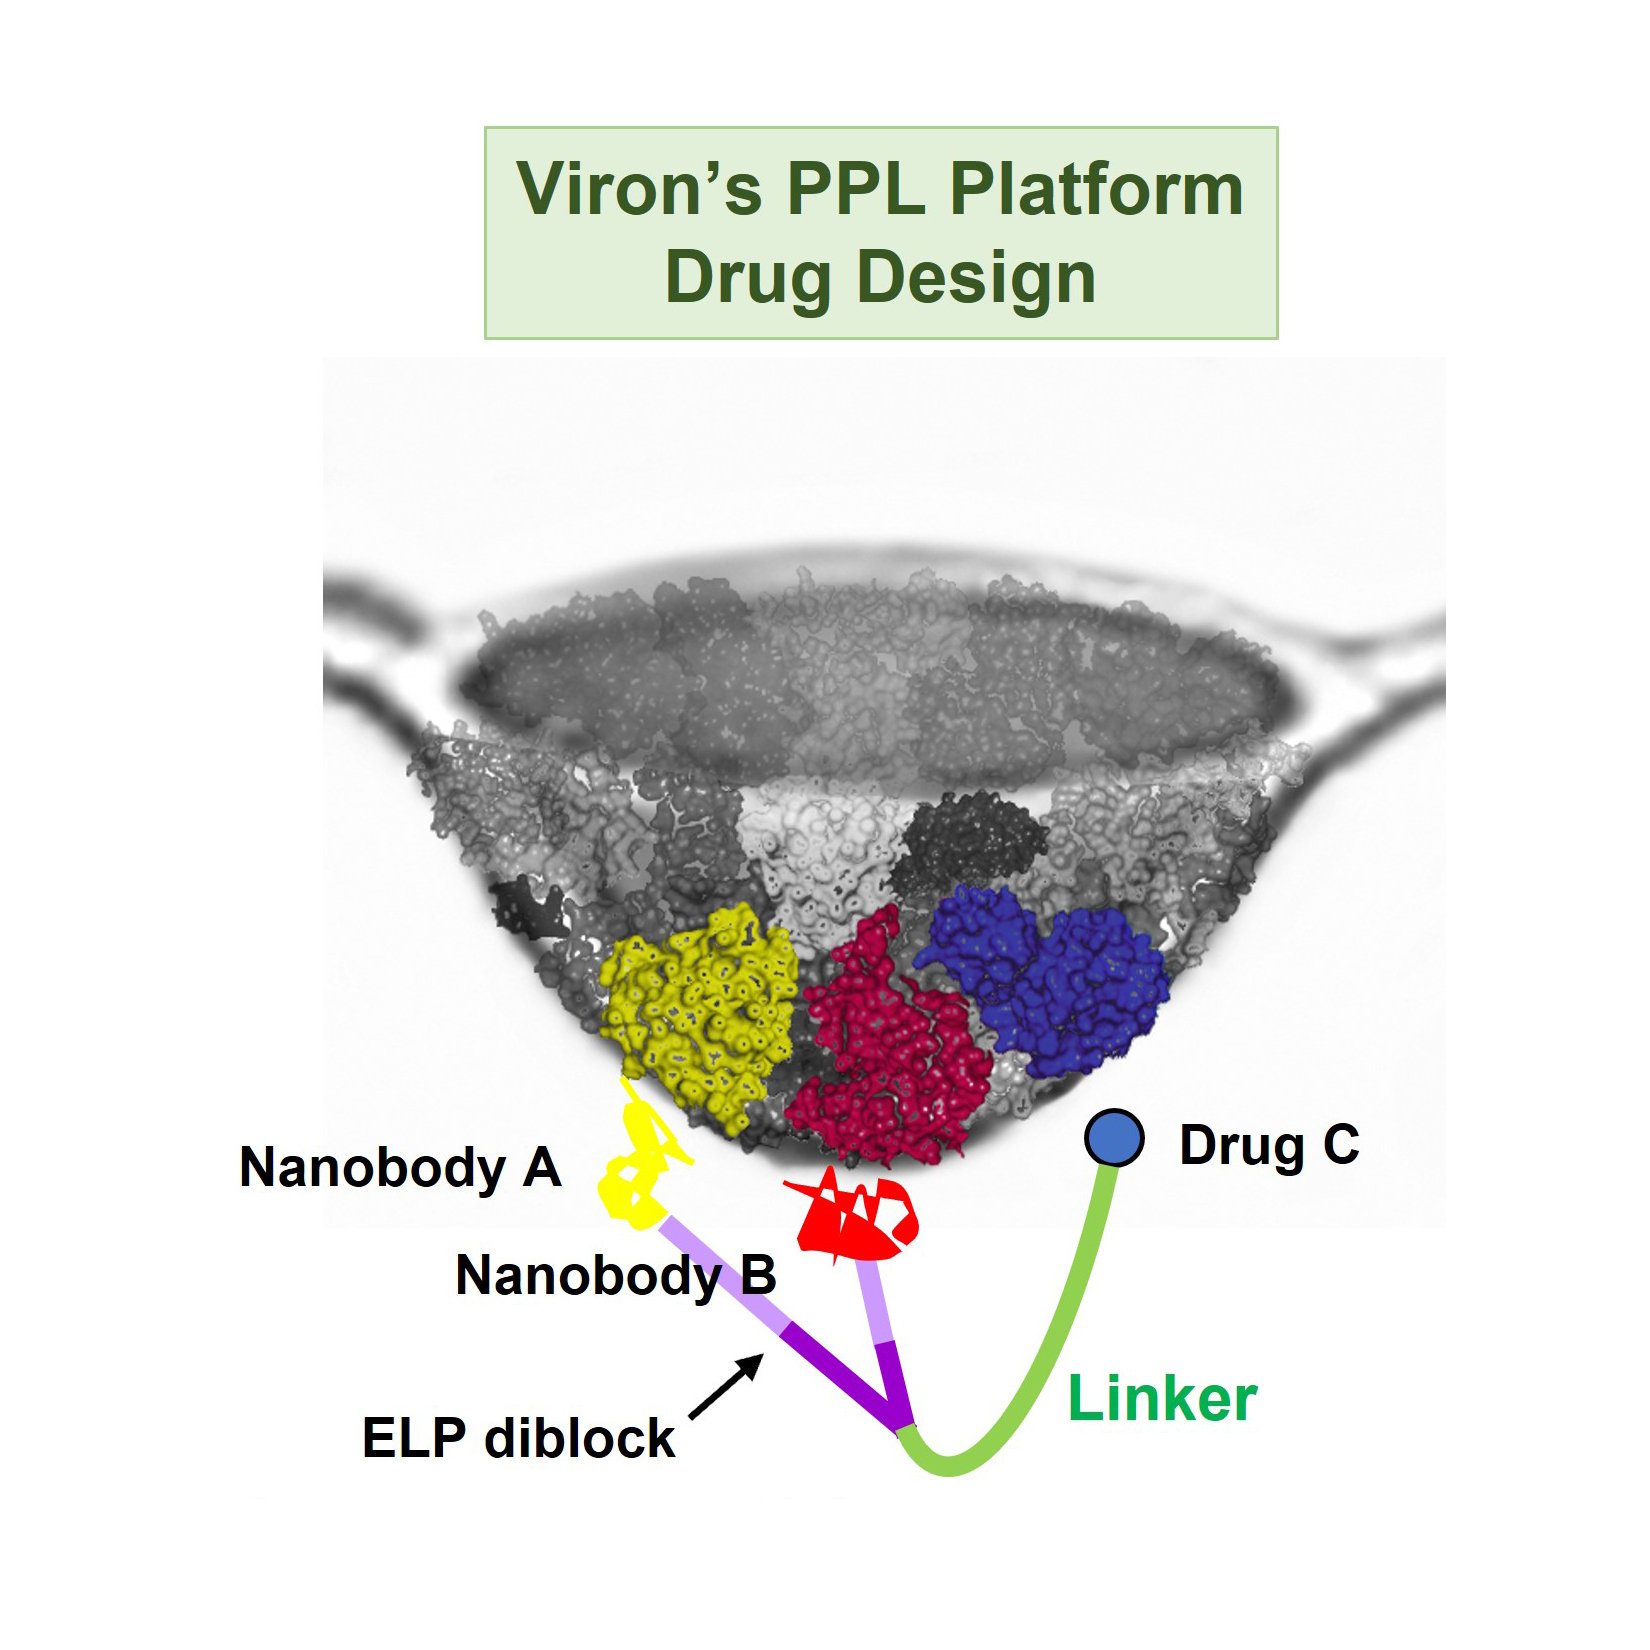 Viron Launches Identification of the Combinatorial Use of Small Molecules as Drugs to Target ‘Undruggable' Porosome Proteins